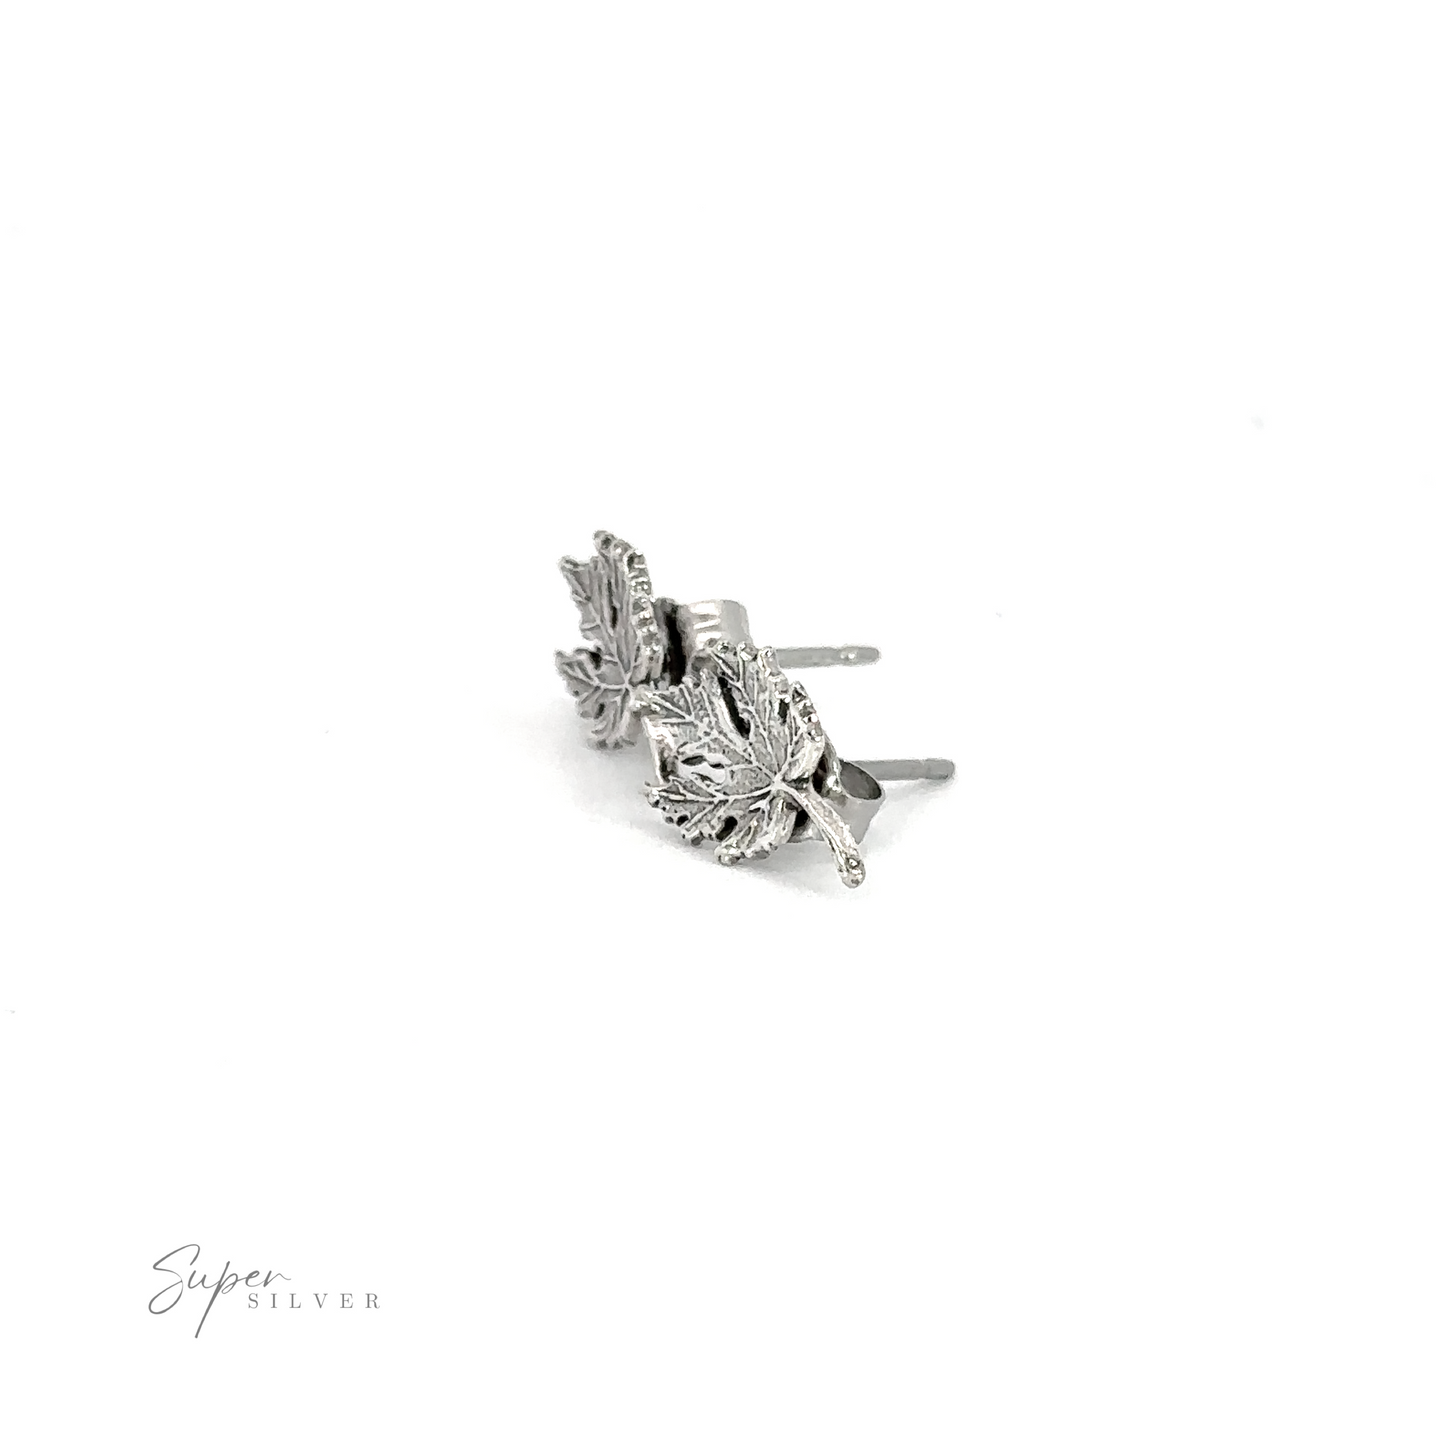 A pair of Maple Leaf Studs on a white background.